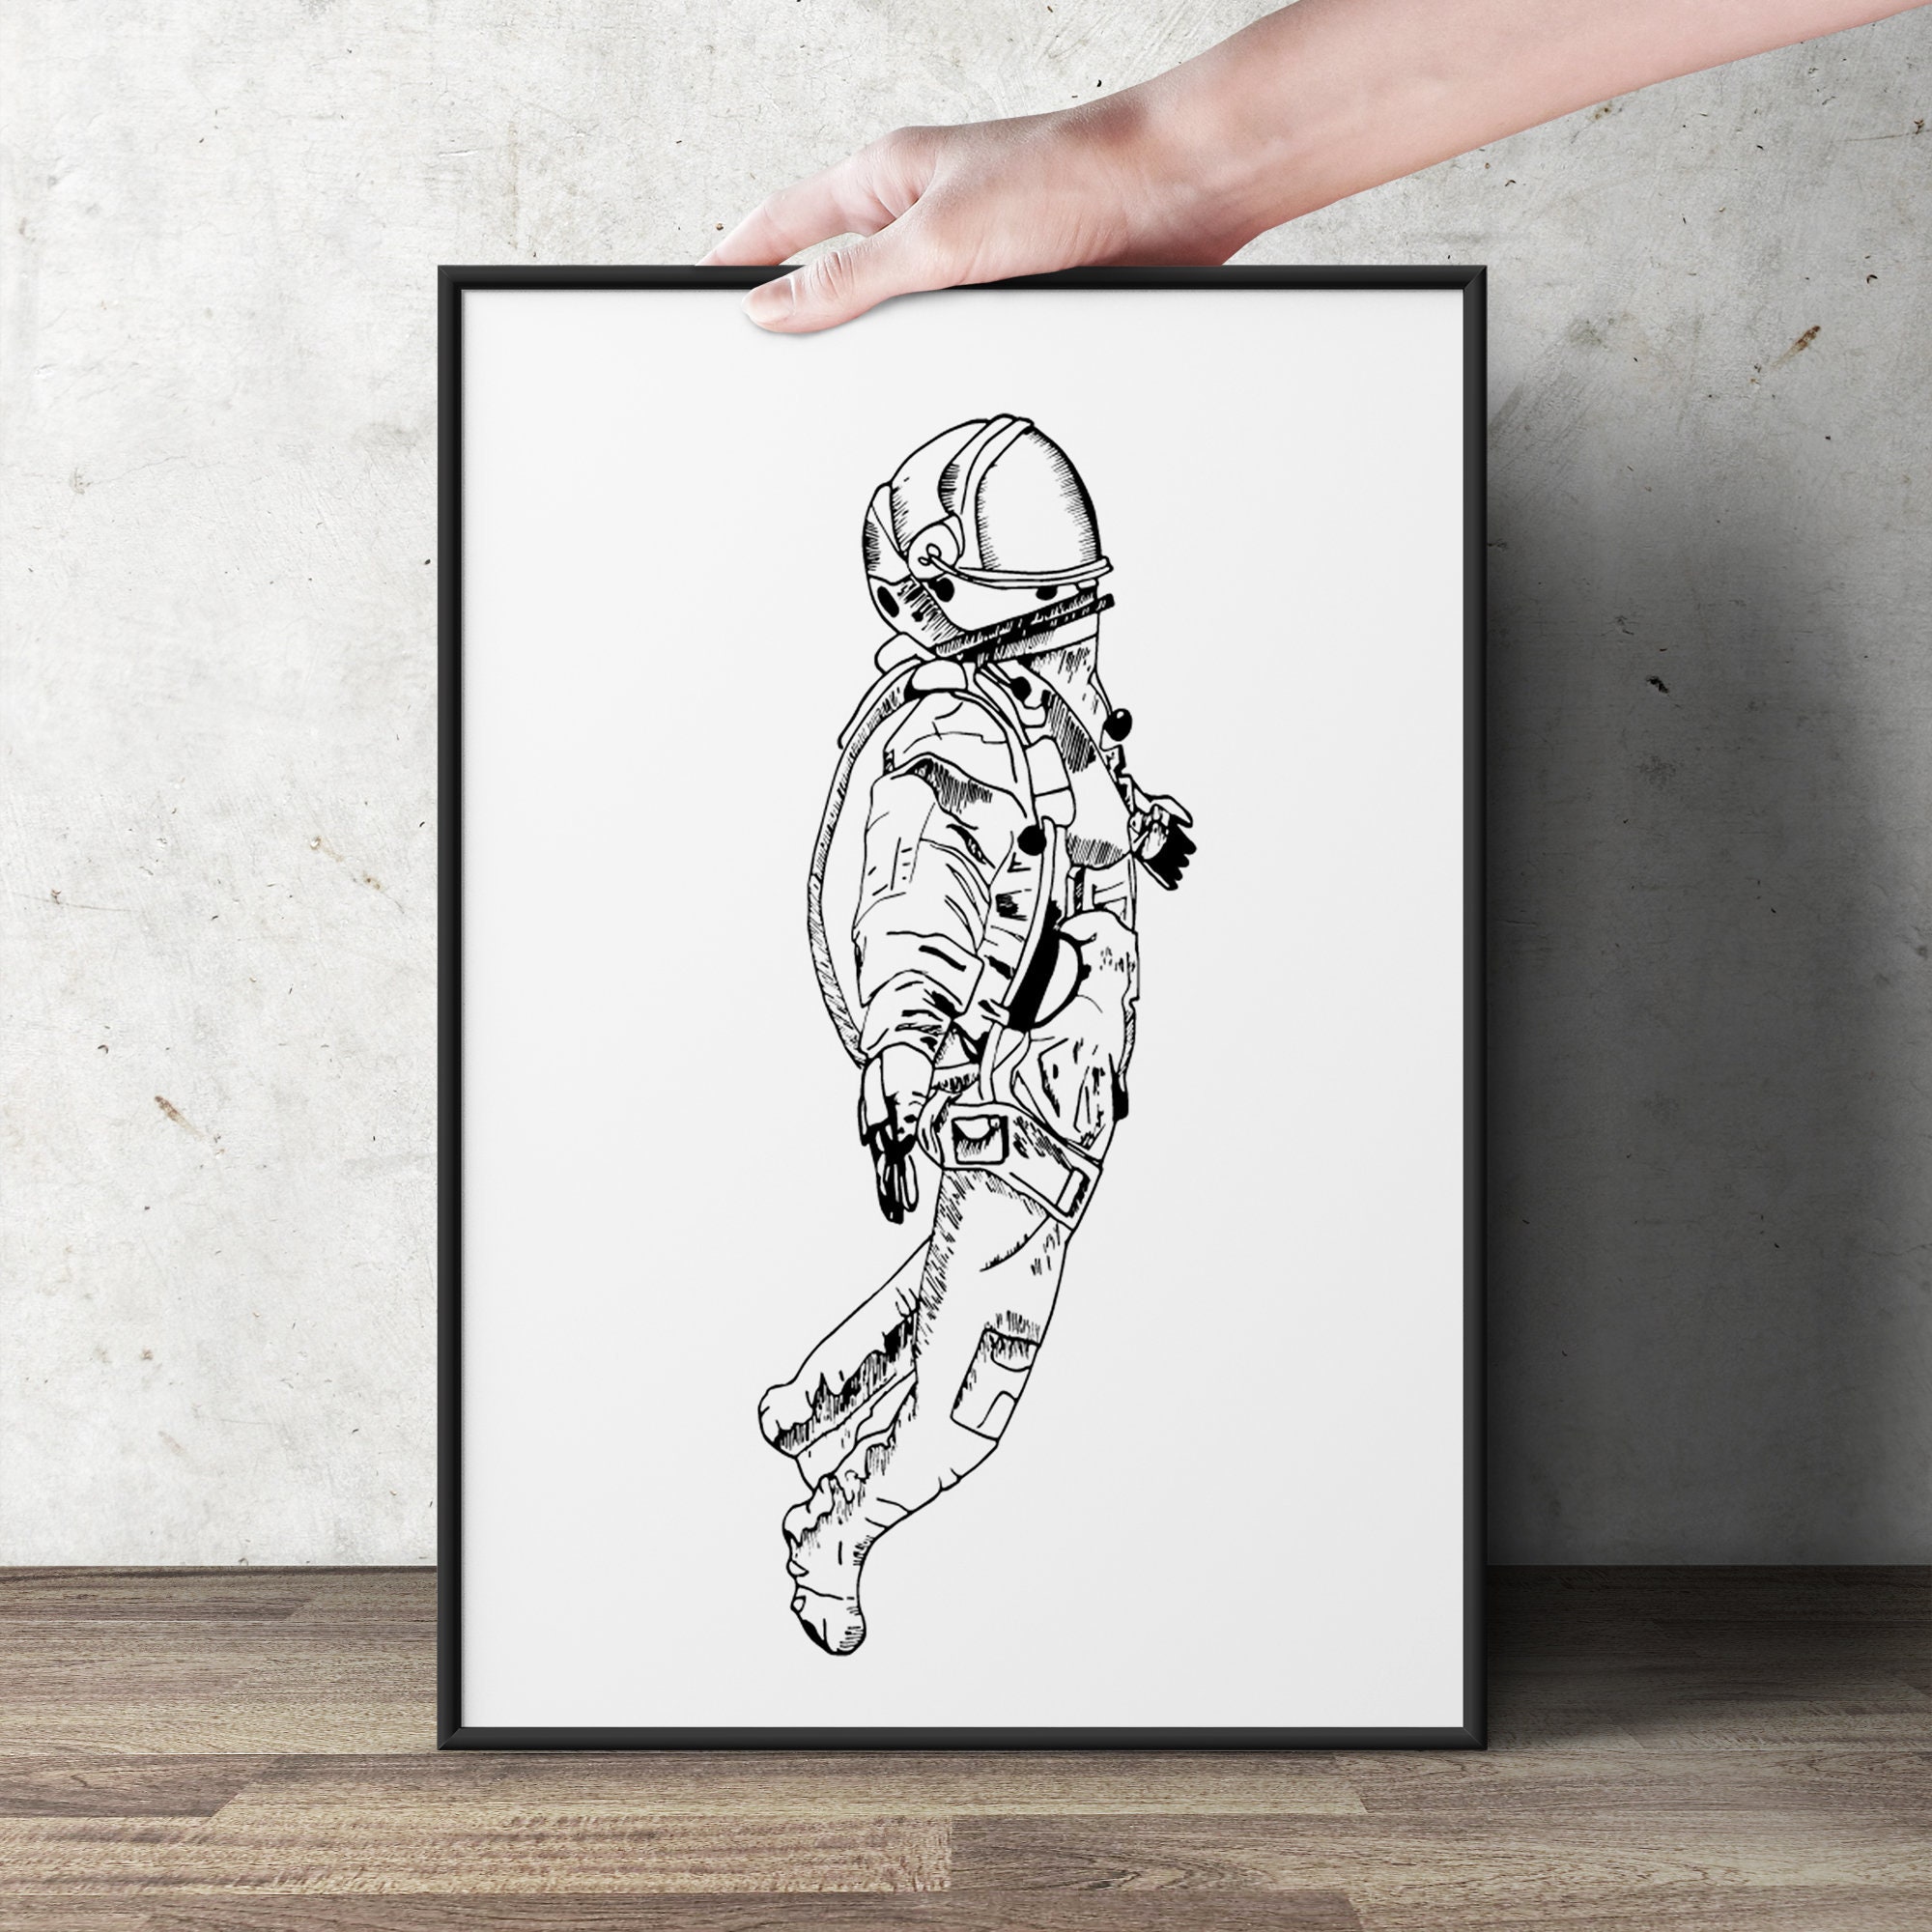 ASTRONAUT IN SPACE DRAWING *timelapse* - YouTube